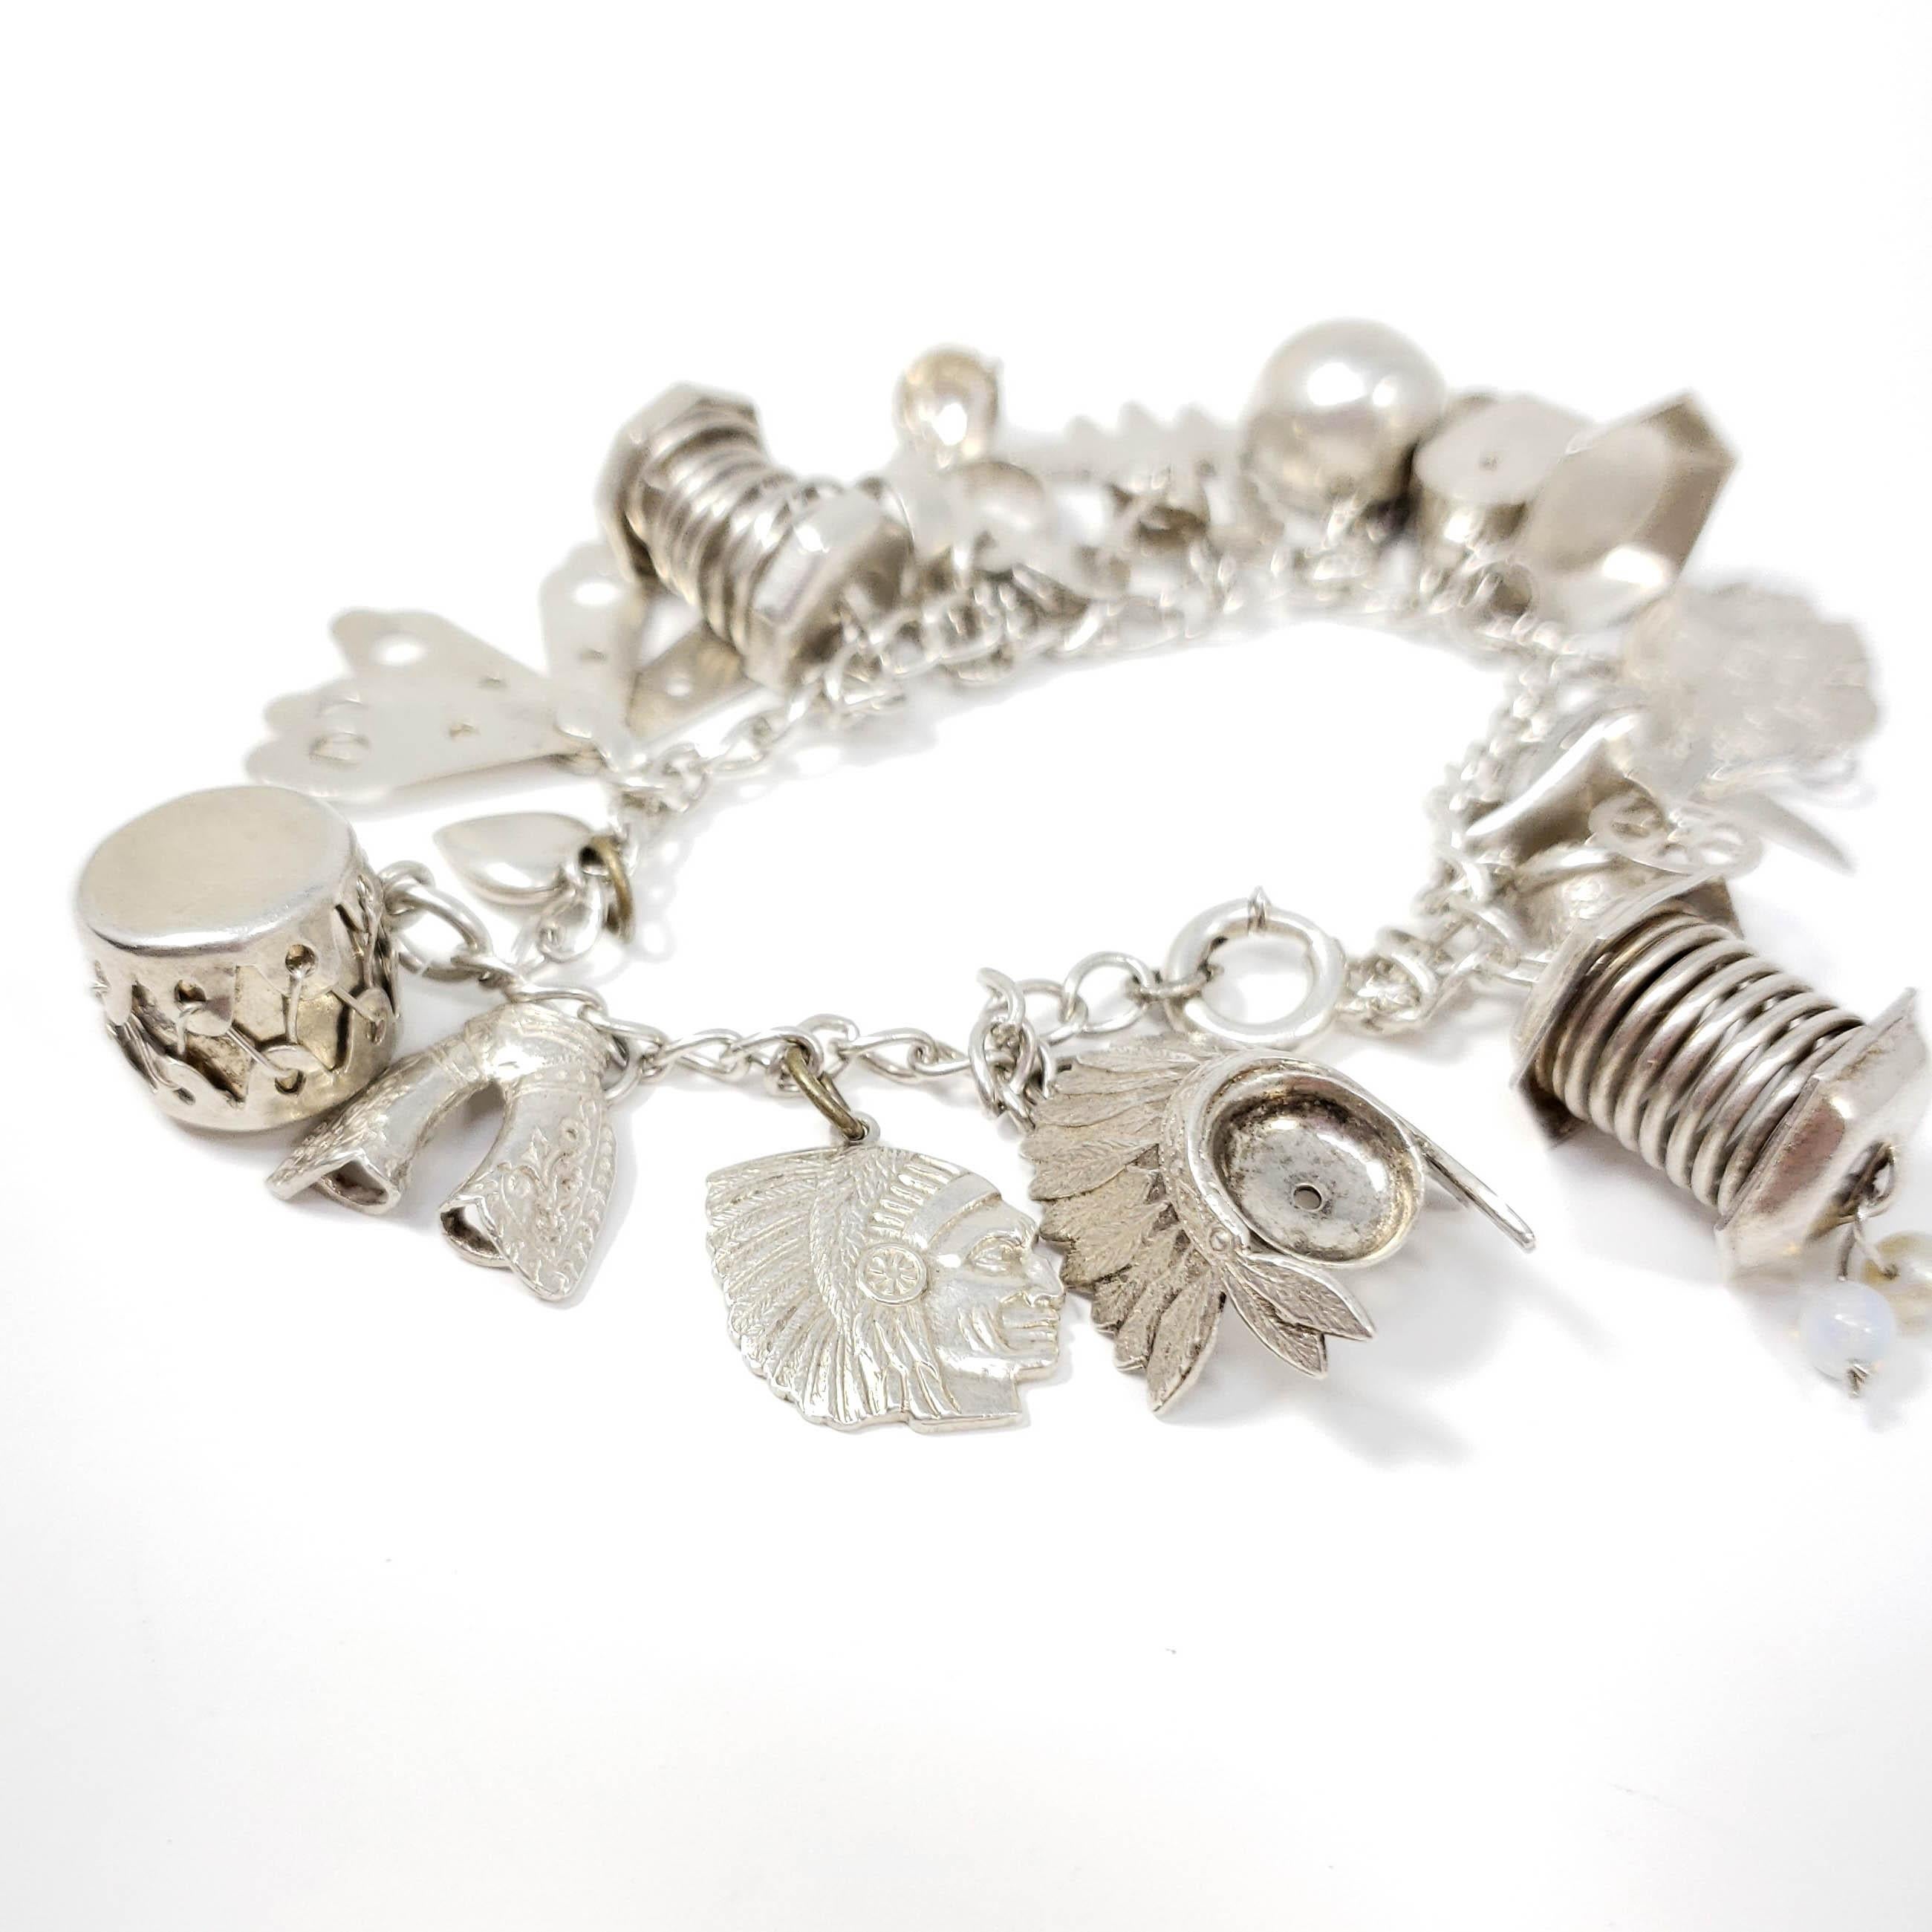 A sterling silver bracelet with an assortment of dangling charms!

Charms: drum, thimble, yarn spinning wheel, mailbox, plate, pliers, ball and chain, plane, weighing scales, cowboy chaps, heart, Native American chieftain, headdress, handcuffs,